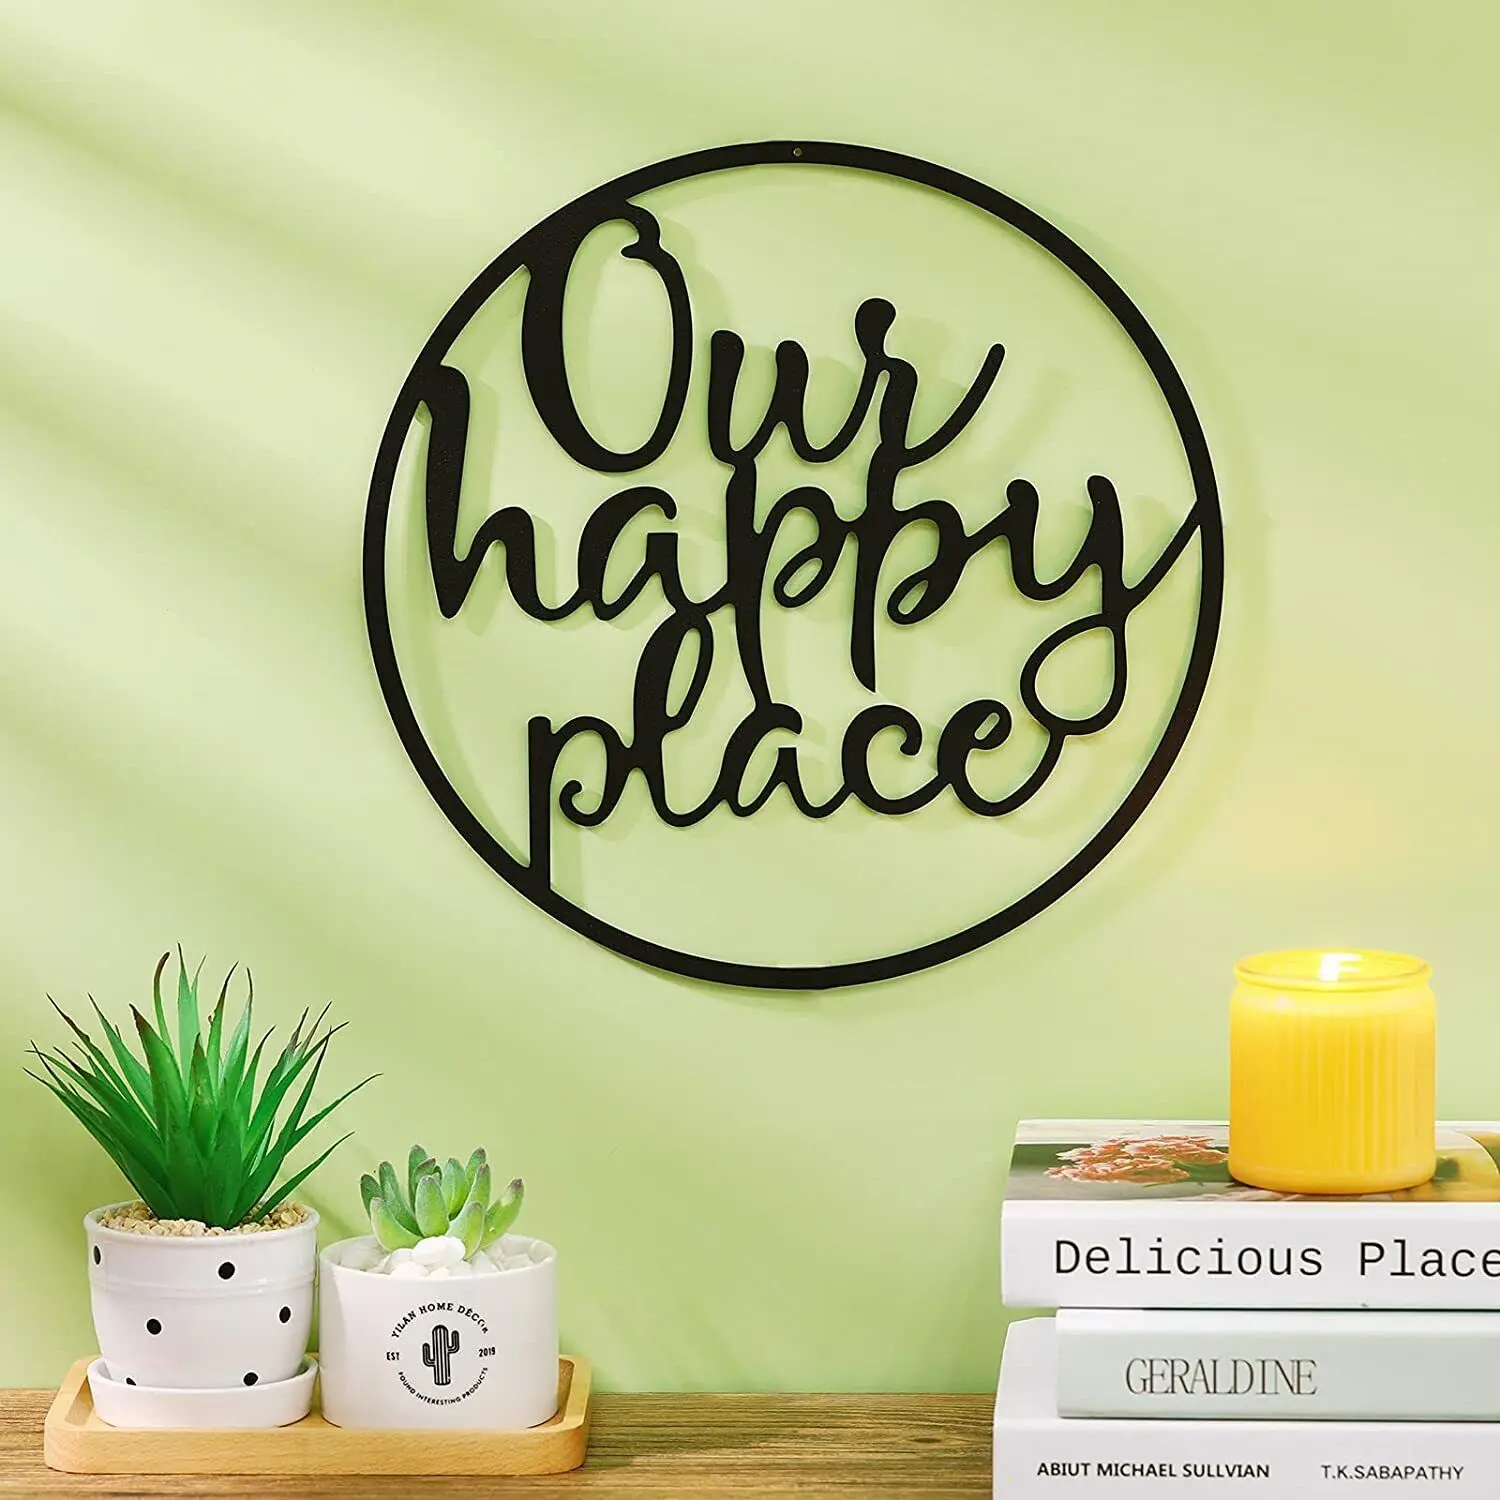 

New Our Happy Place Metal Wall Sign Metal Wall Hanging Art Indoor Wall Decor